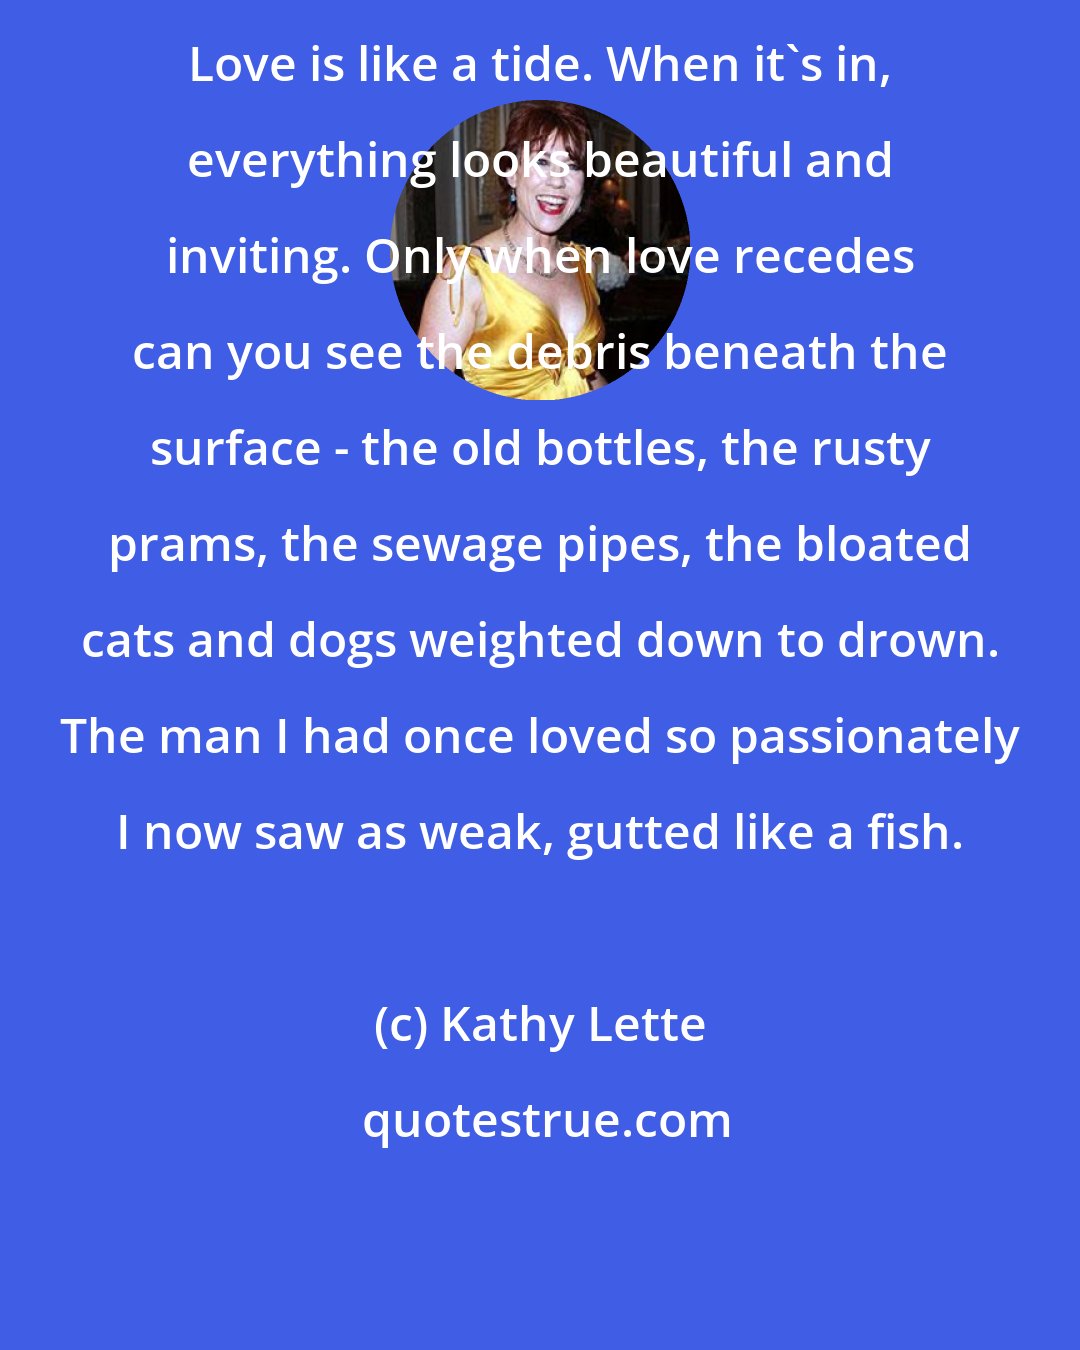 Kathy Lette: Love is like a tide. When it's in, everything looks beautiful and inviting. Only when love recedes can you see the debris beneath the surface - the old bottles, the rusty prams, the sewage pipes, the bloated cats and dogs weighted down to drown. The man I had once loved so passionately I now saw as weak, gutted like a fish.